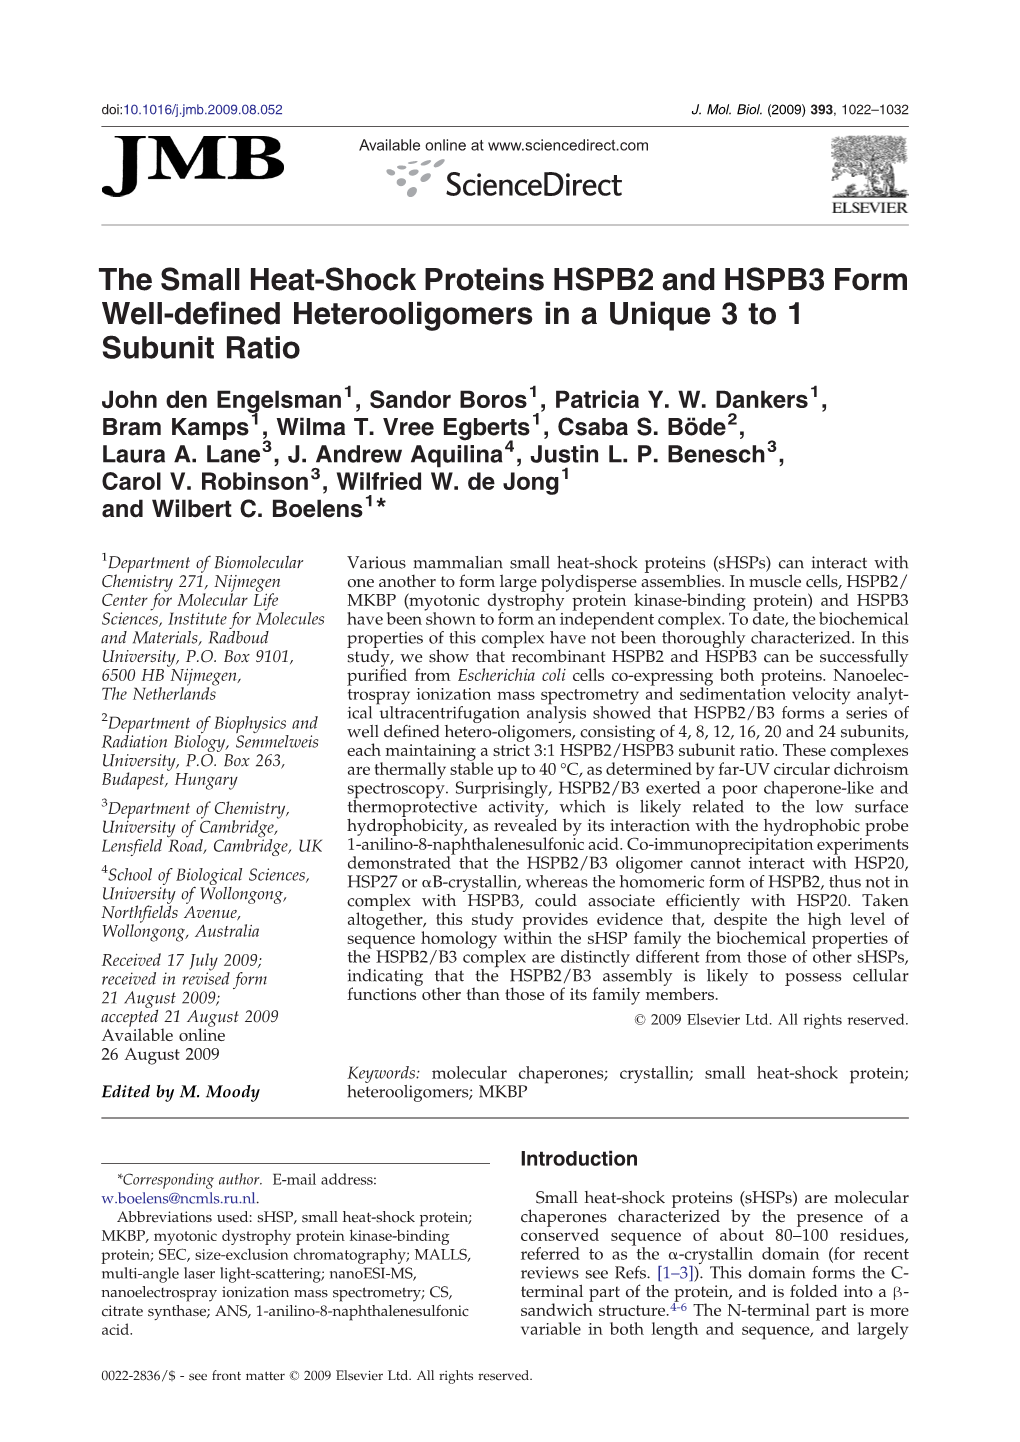 The Small Heat-Shock Proteins HSPB2 and HSPB3 Form Well-Defined Heterooligomers in a Unique 3 to 1 Subunit Ratio